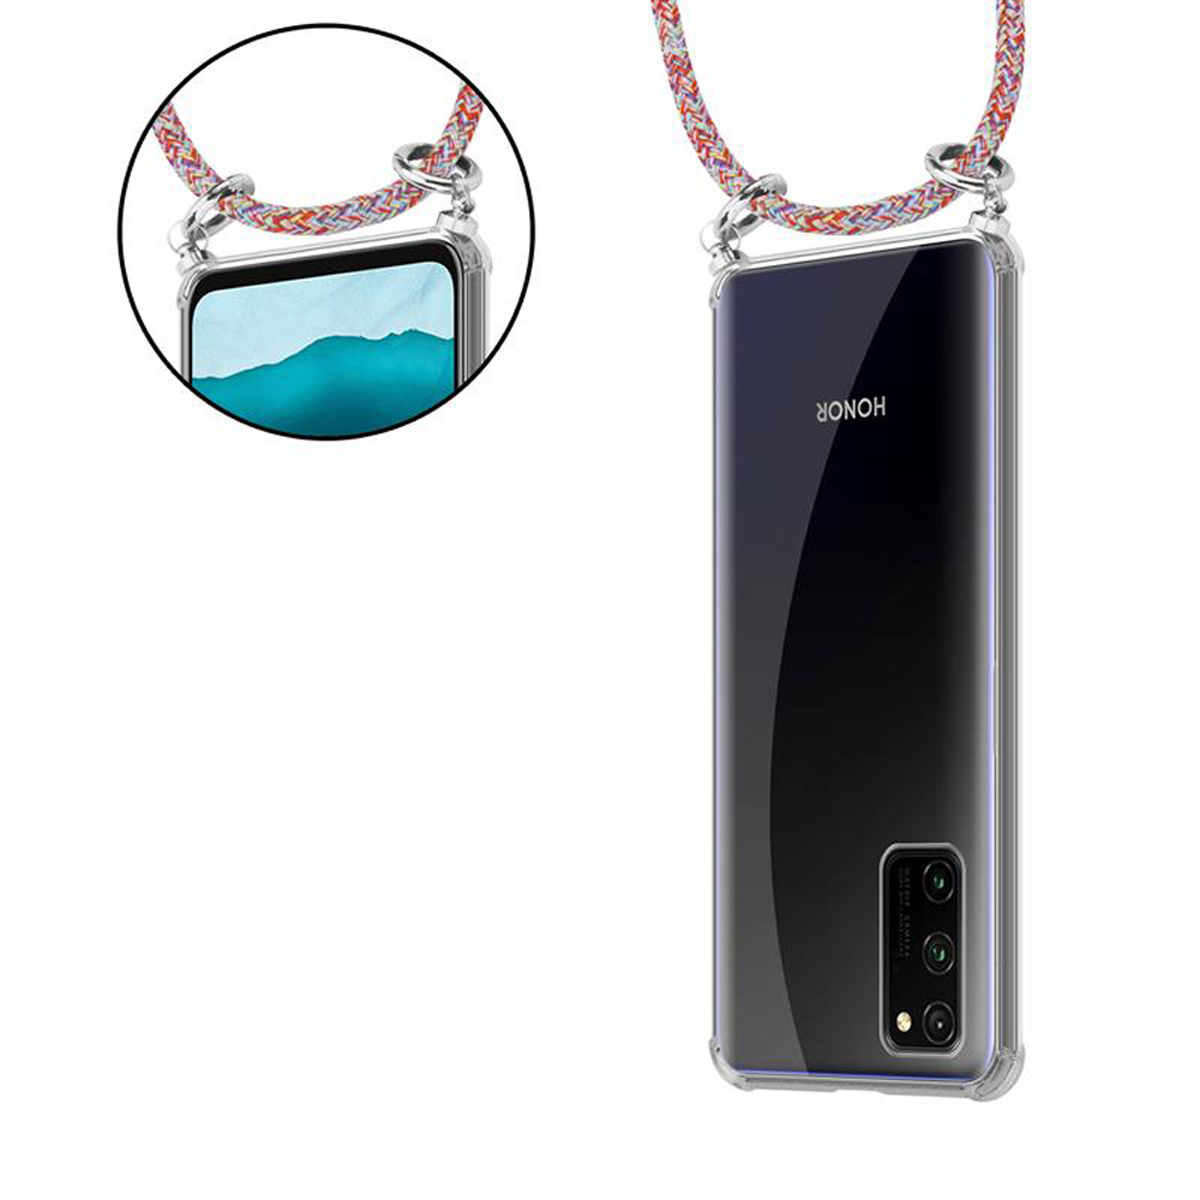 Ringen, Hülle, abnehmbarer Band PARROT und View PRO, COLORFUL Kette Handy Kordel Silber mit CADORABO 30 Backcover, Honor,